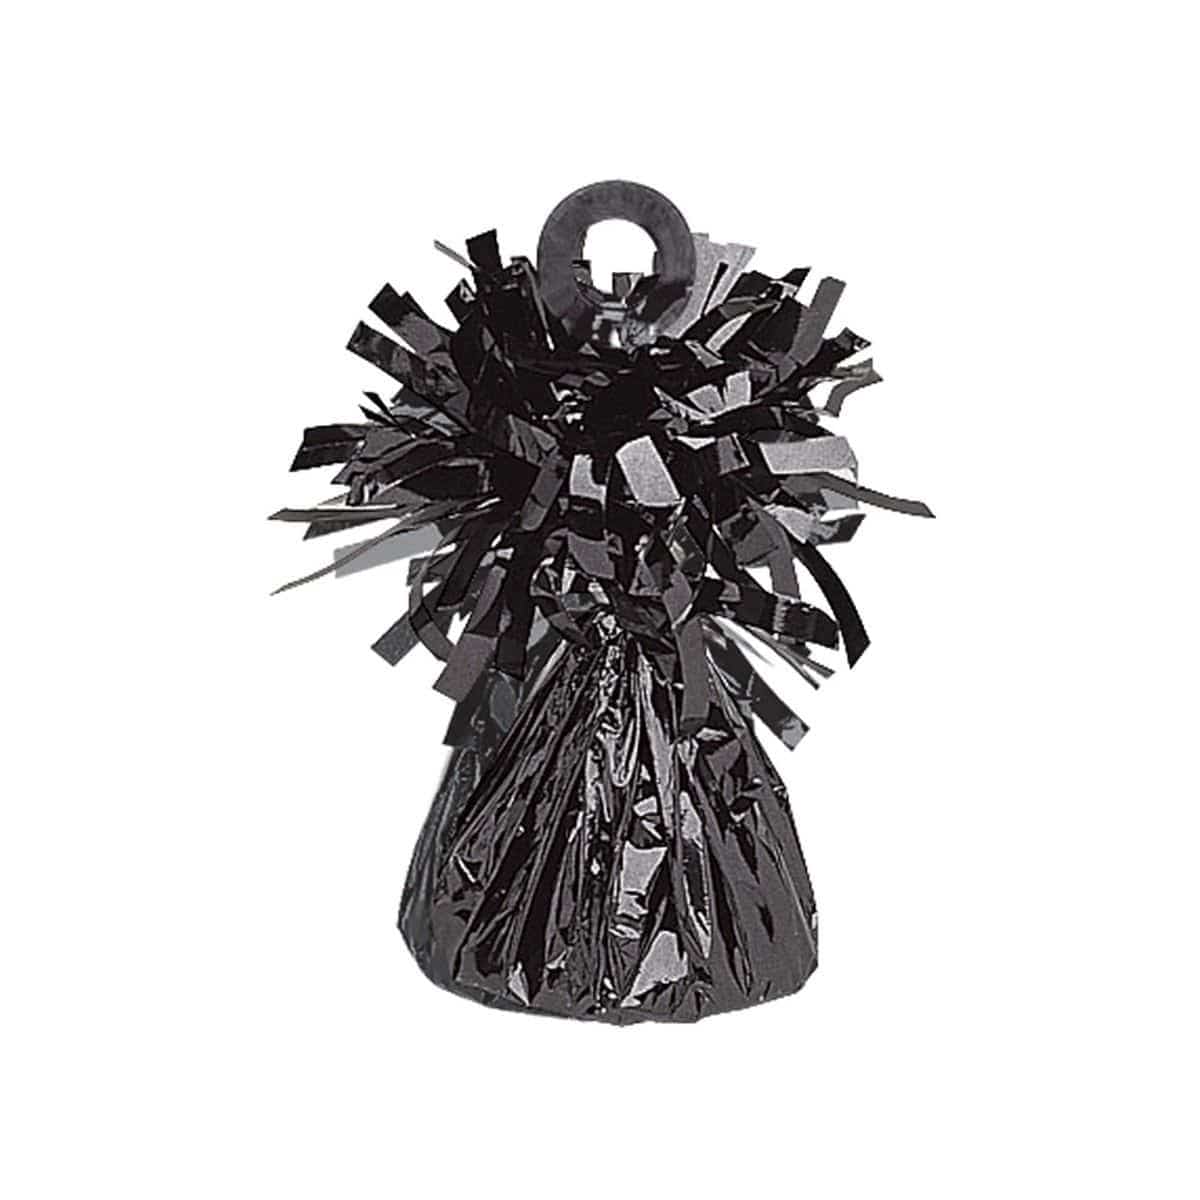 Buy Balloons Foil Balloon Weight - Black sold at Party Expert